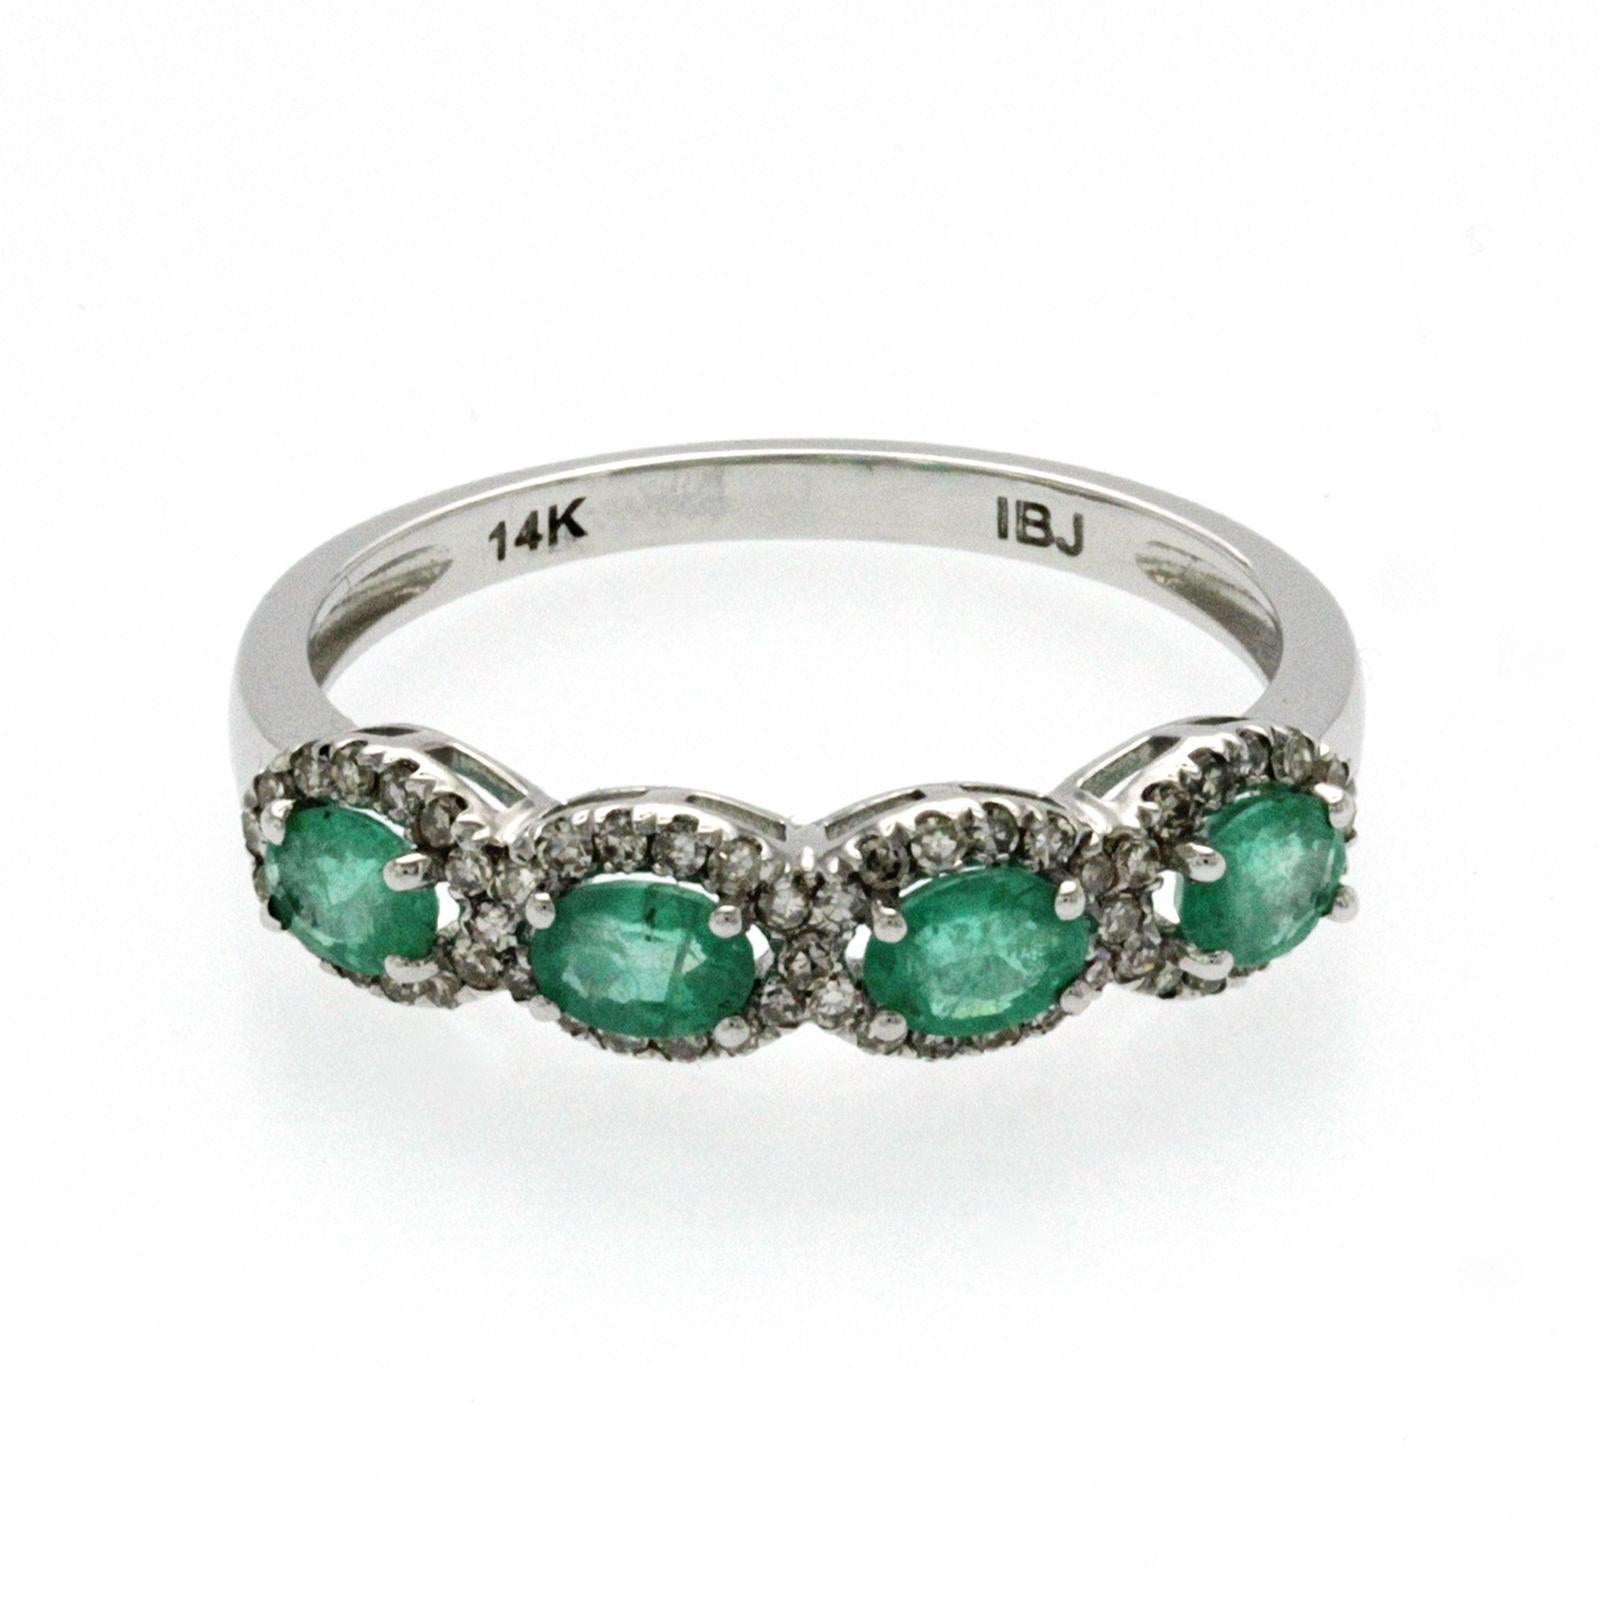 100% Authentic, 100% Customer Satisfaction

Height: 5 mm

Width: 1.8 mm

Size: 7

Metal:14K White Gold

Hallmarks: 14K

Total Weight: 2 Grams

Stone Type: 0.40 CT Natural Colombian Emerald & 0.24 CT Diamonds

Condition: New

Estimated Price: